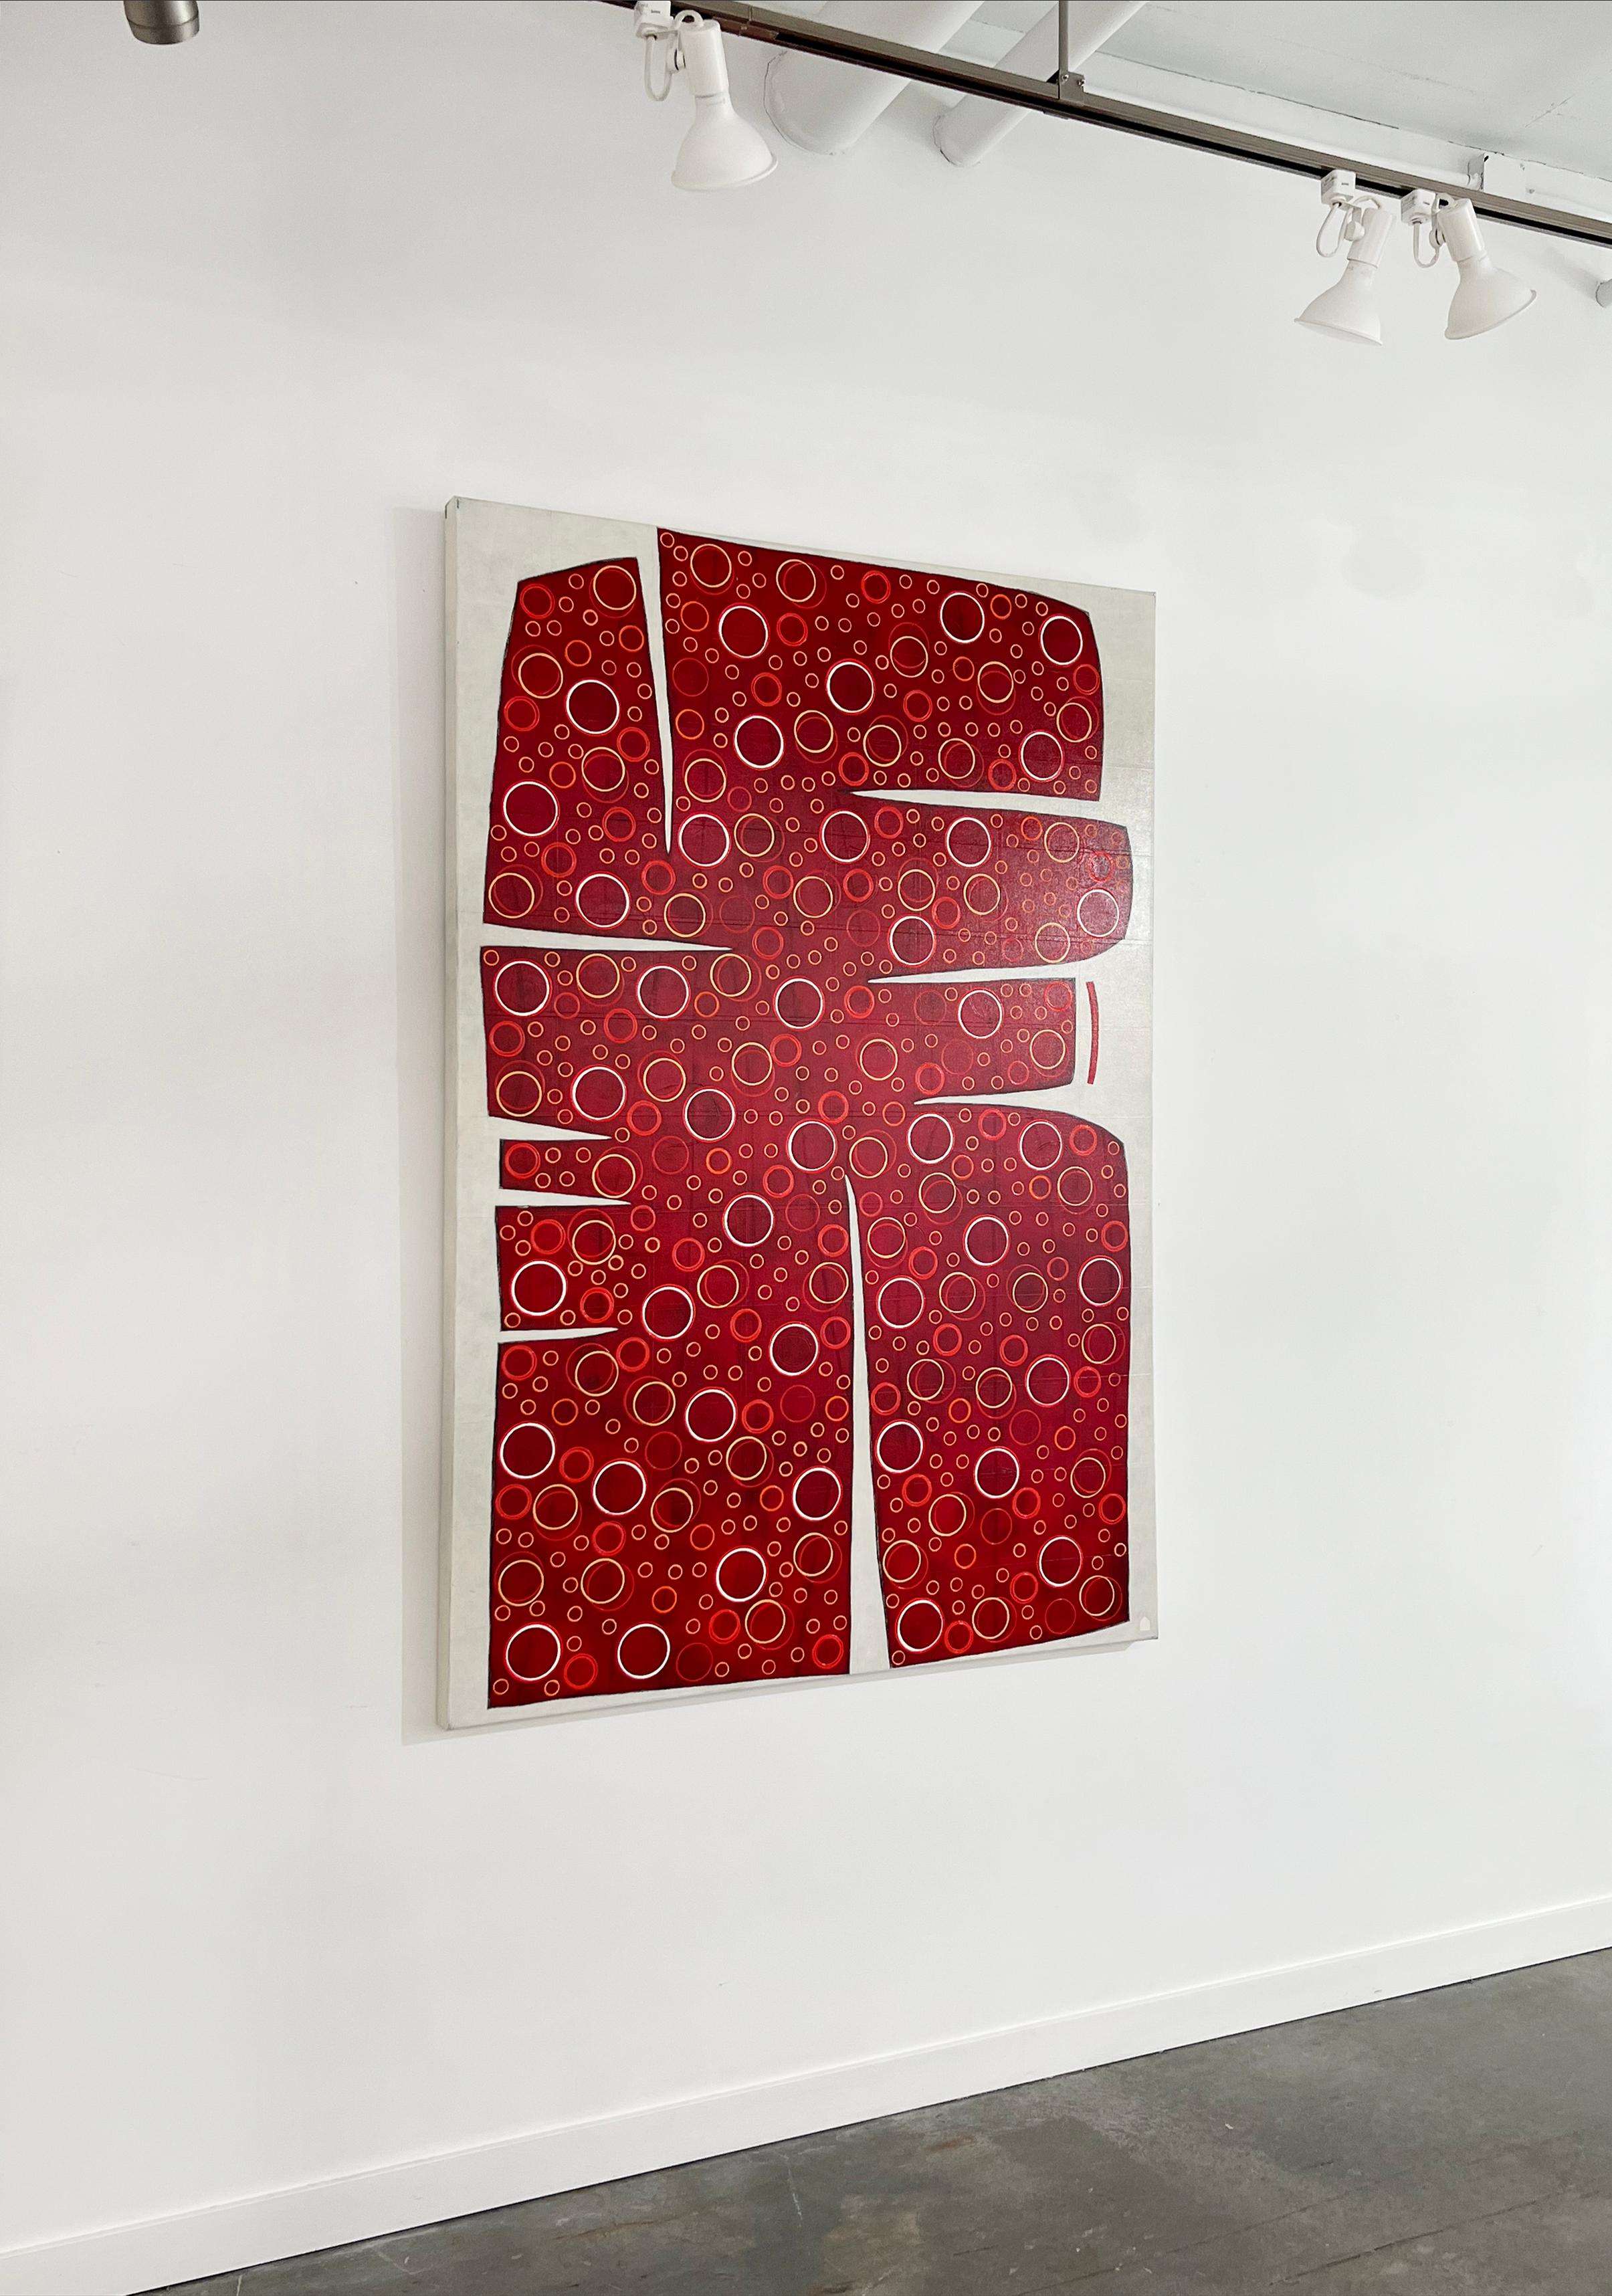 This large abstract statement painting by Sofie Swann is made with acrylic paint on canvas. It features an organic abstract red shape that covers almost the entire canvas, leaving a small border of painterly off-white around it. The shape is a deep